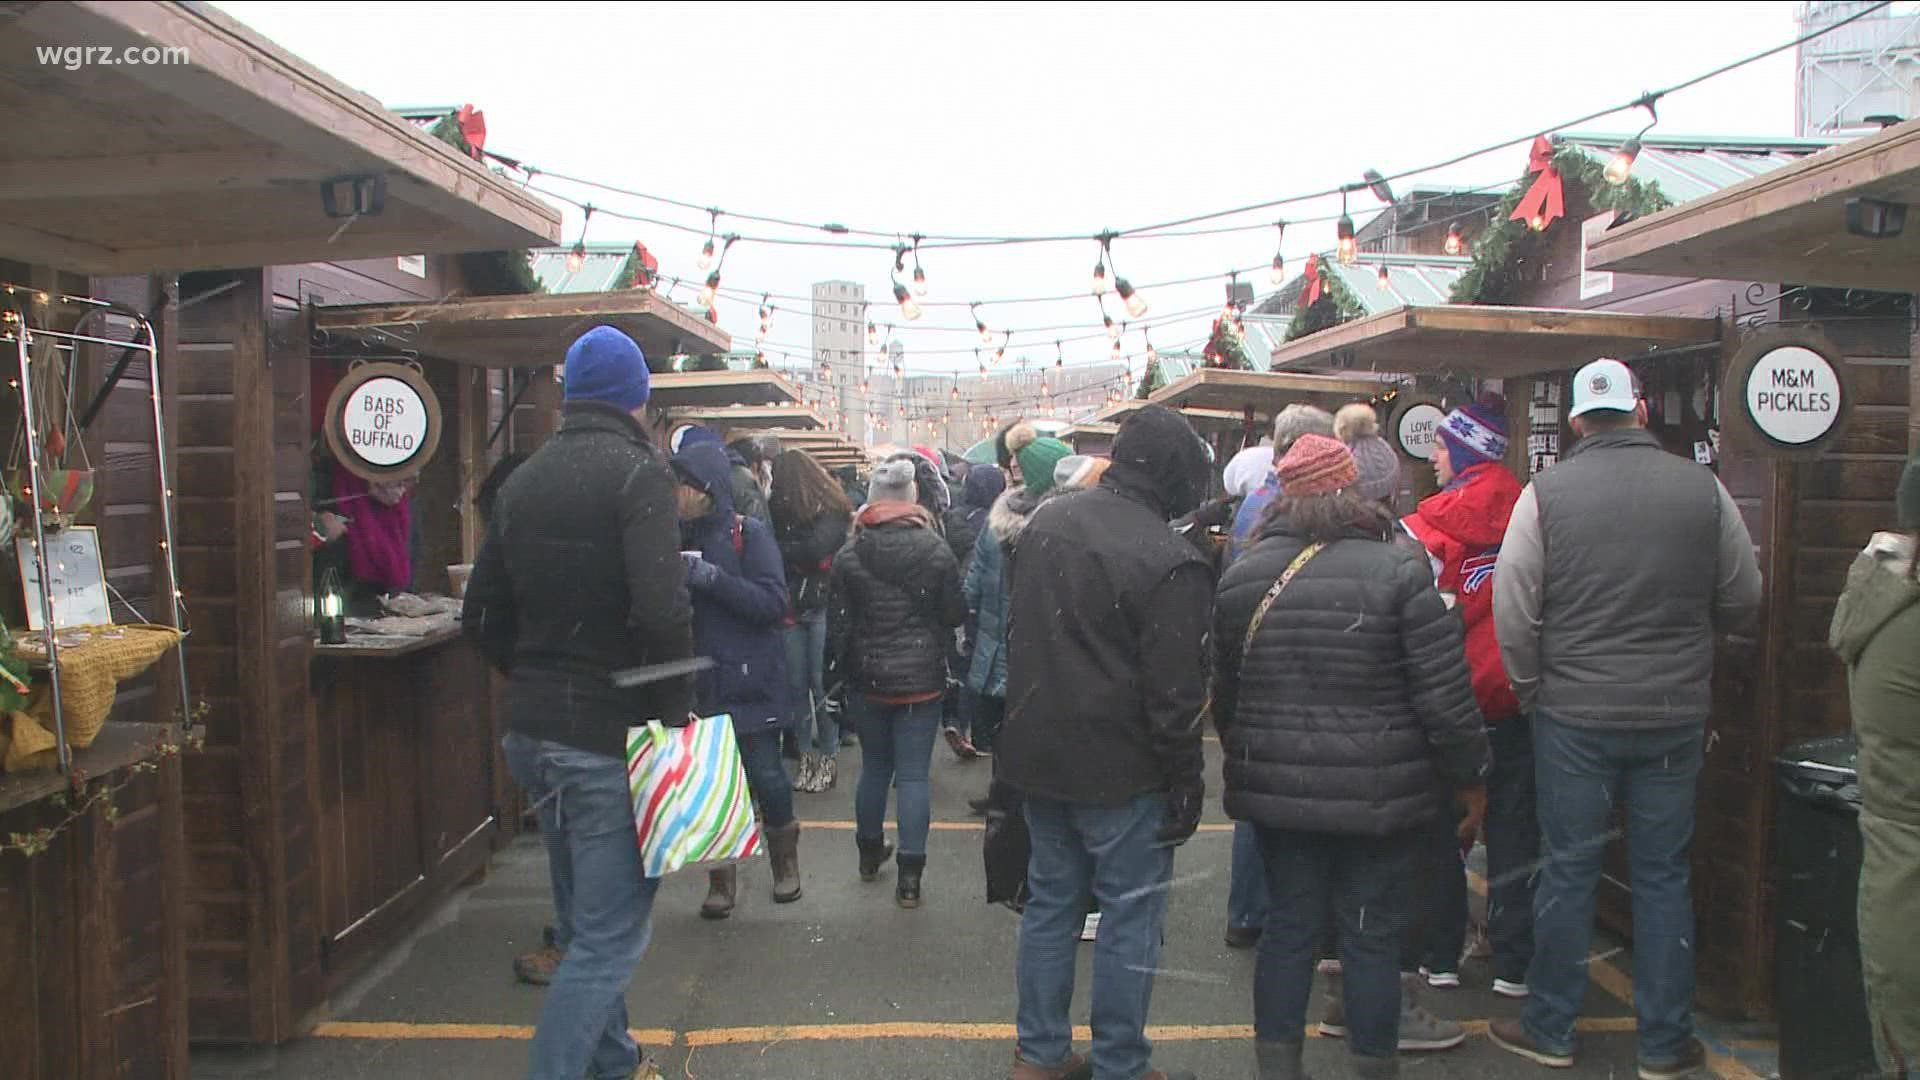 The European-style outdoor holiday market has 30 wooden sheds for different vendors showcasing local products.